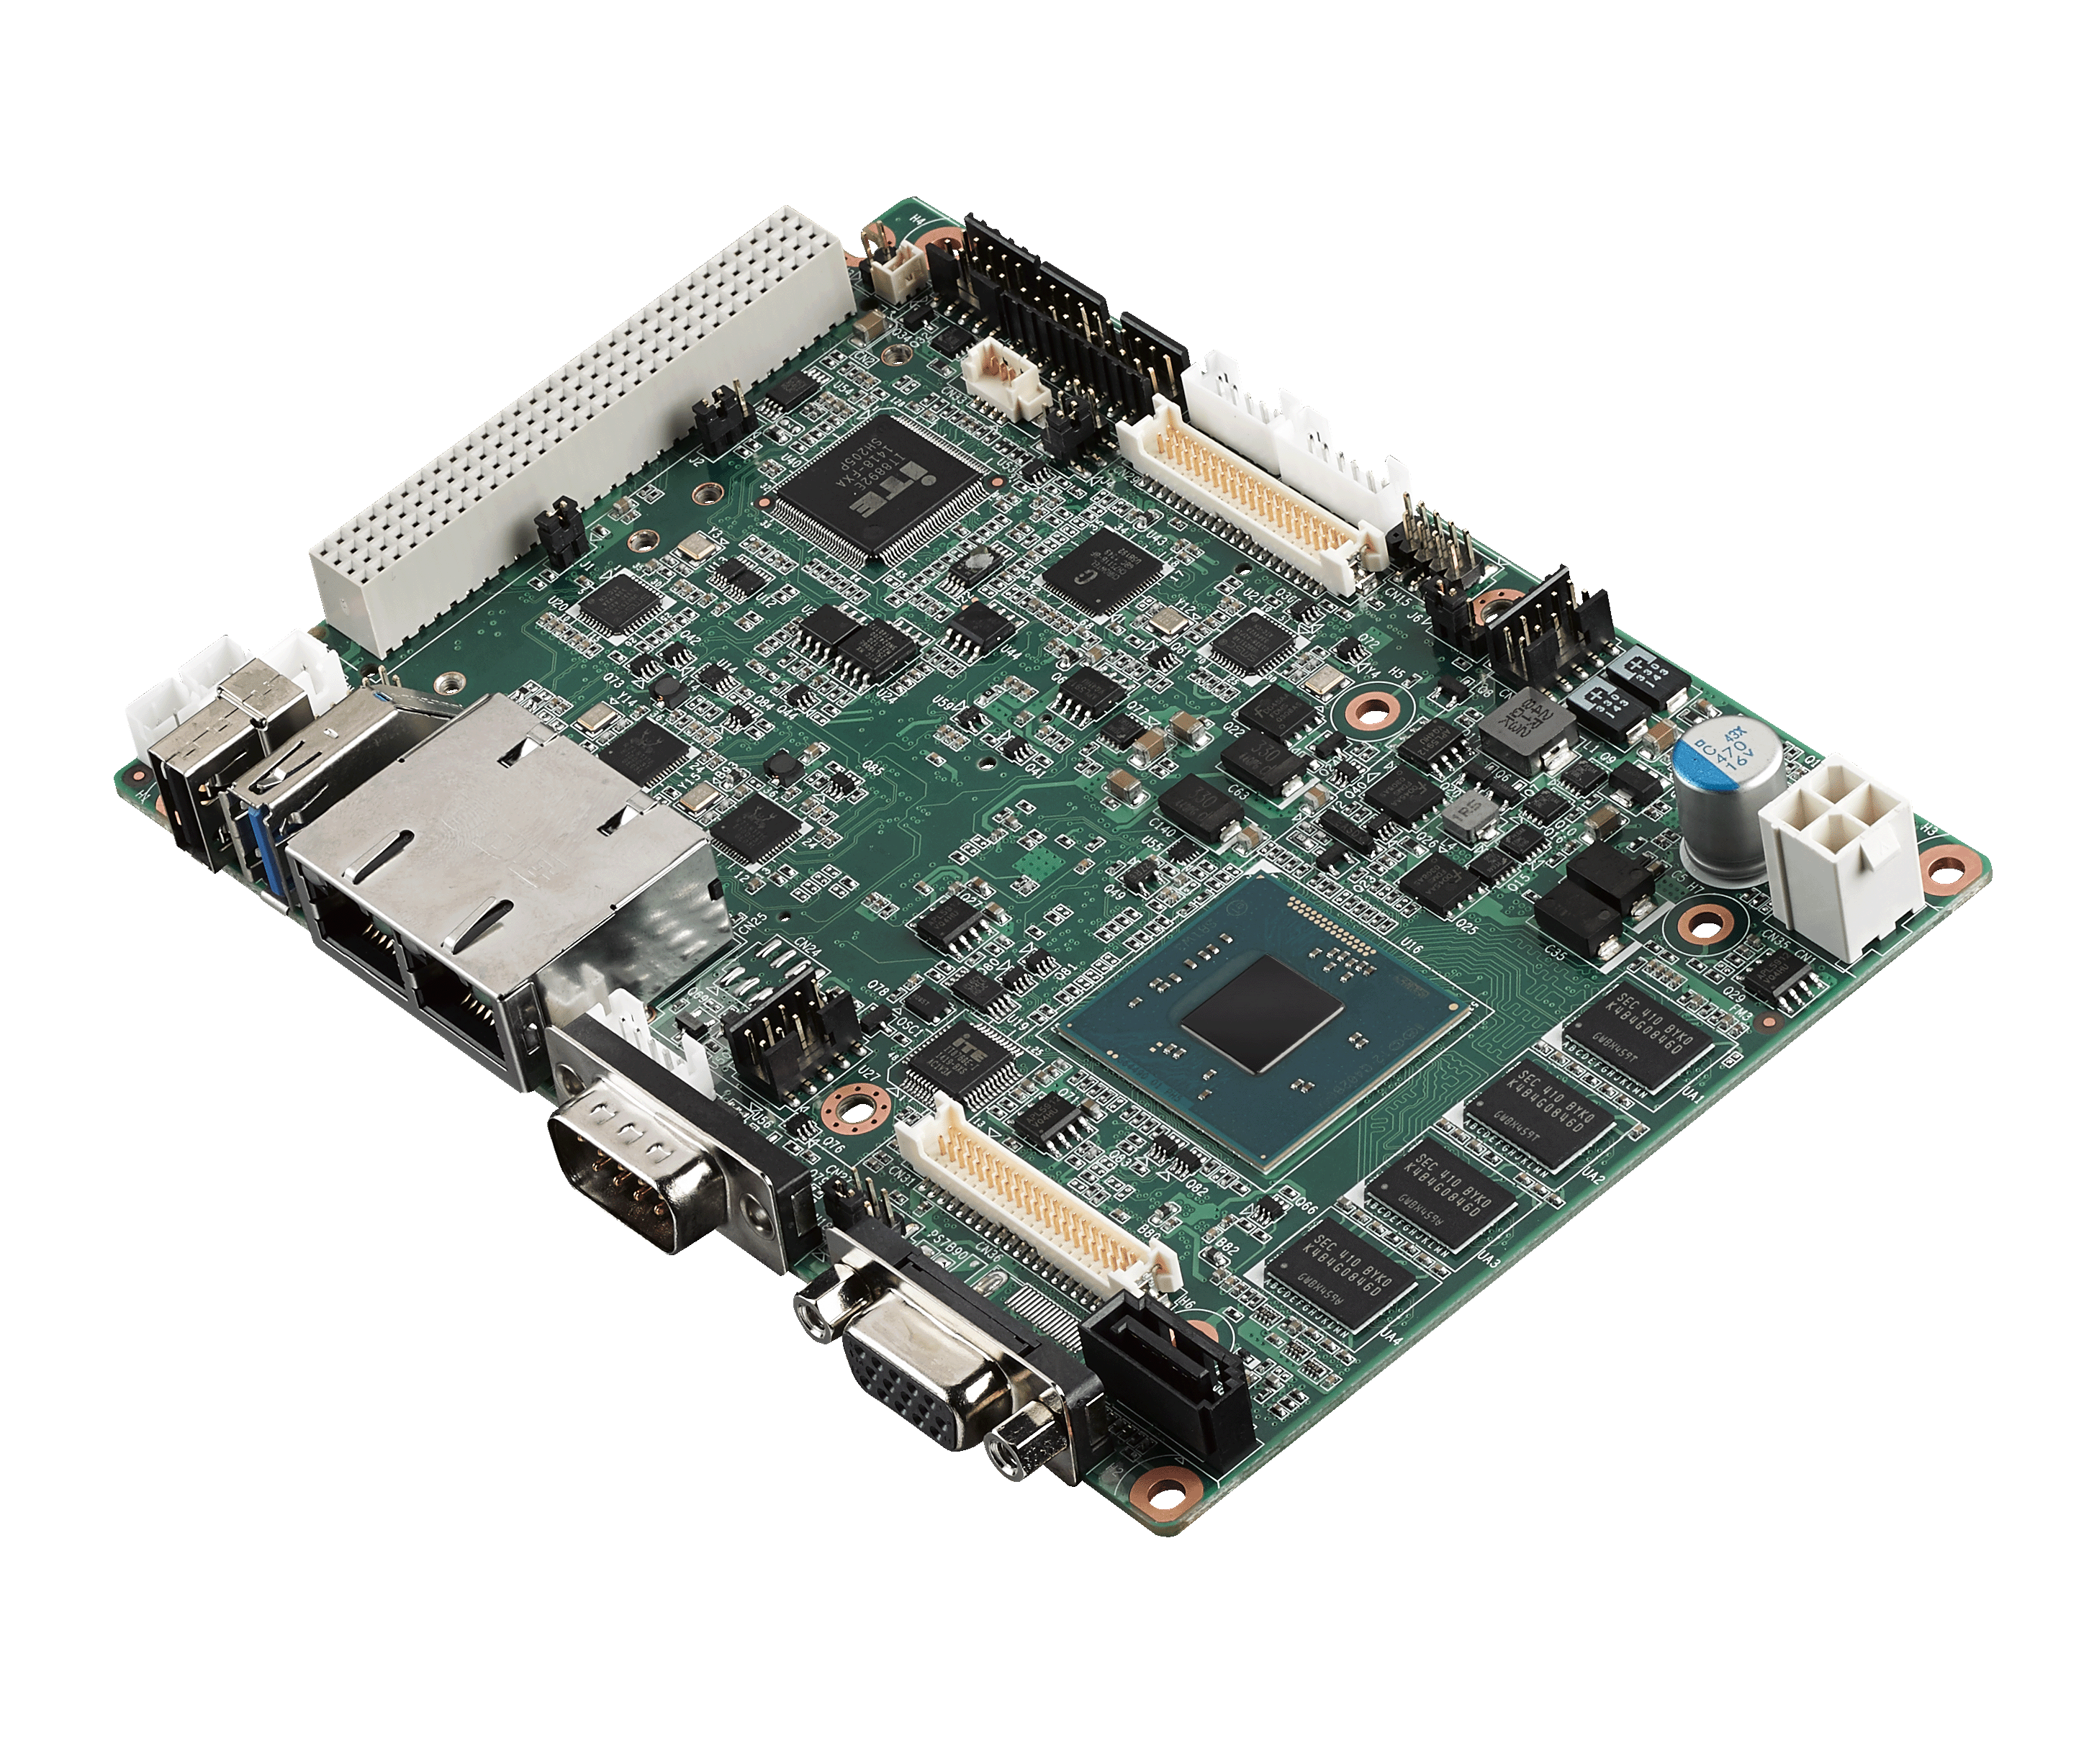 3.5” Embedded Single Board Computer Intel<sup>®</sup> Atom E3825, PCI-104 2G RAM/VGA+LVDS , Wide Temp Support (-40 ~ 85° C)